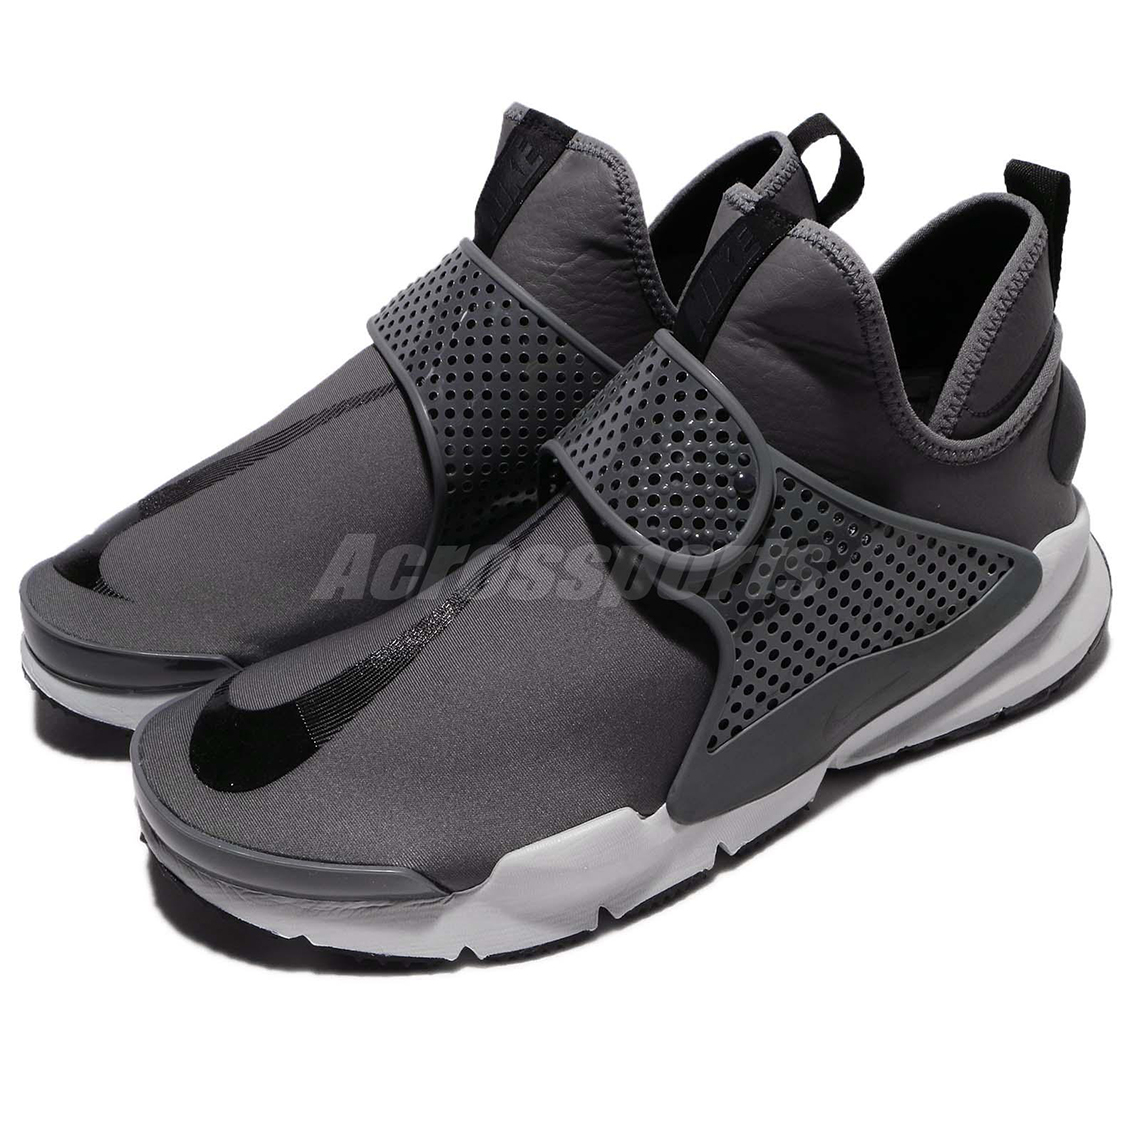 nike-sock-dart-mid-anthracite-924454-003-available-now-2.jpg